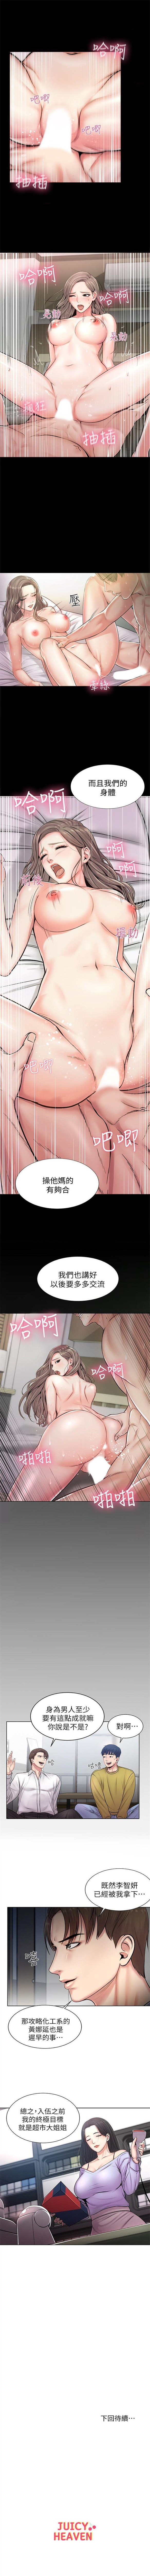 Amateur 超市的漂亮姐姐 1-29 官方中文（連載中） Lolicon - Page 9